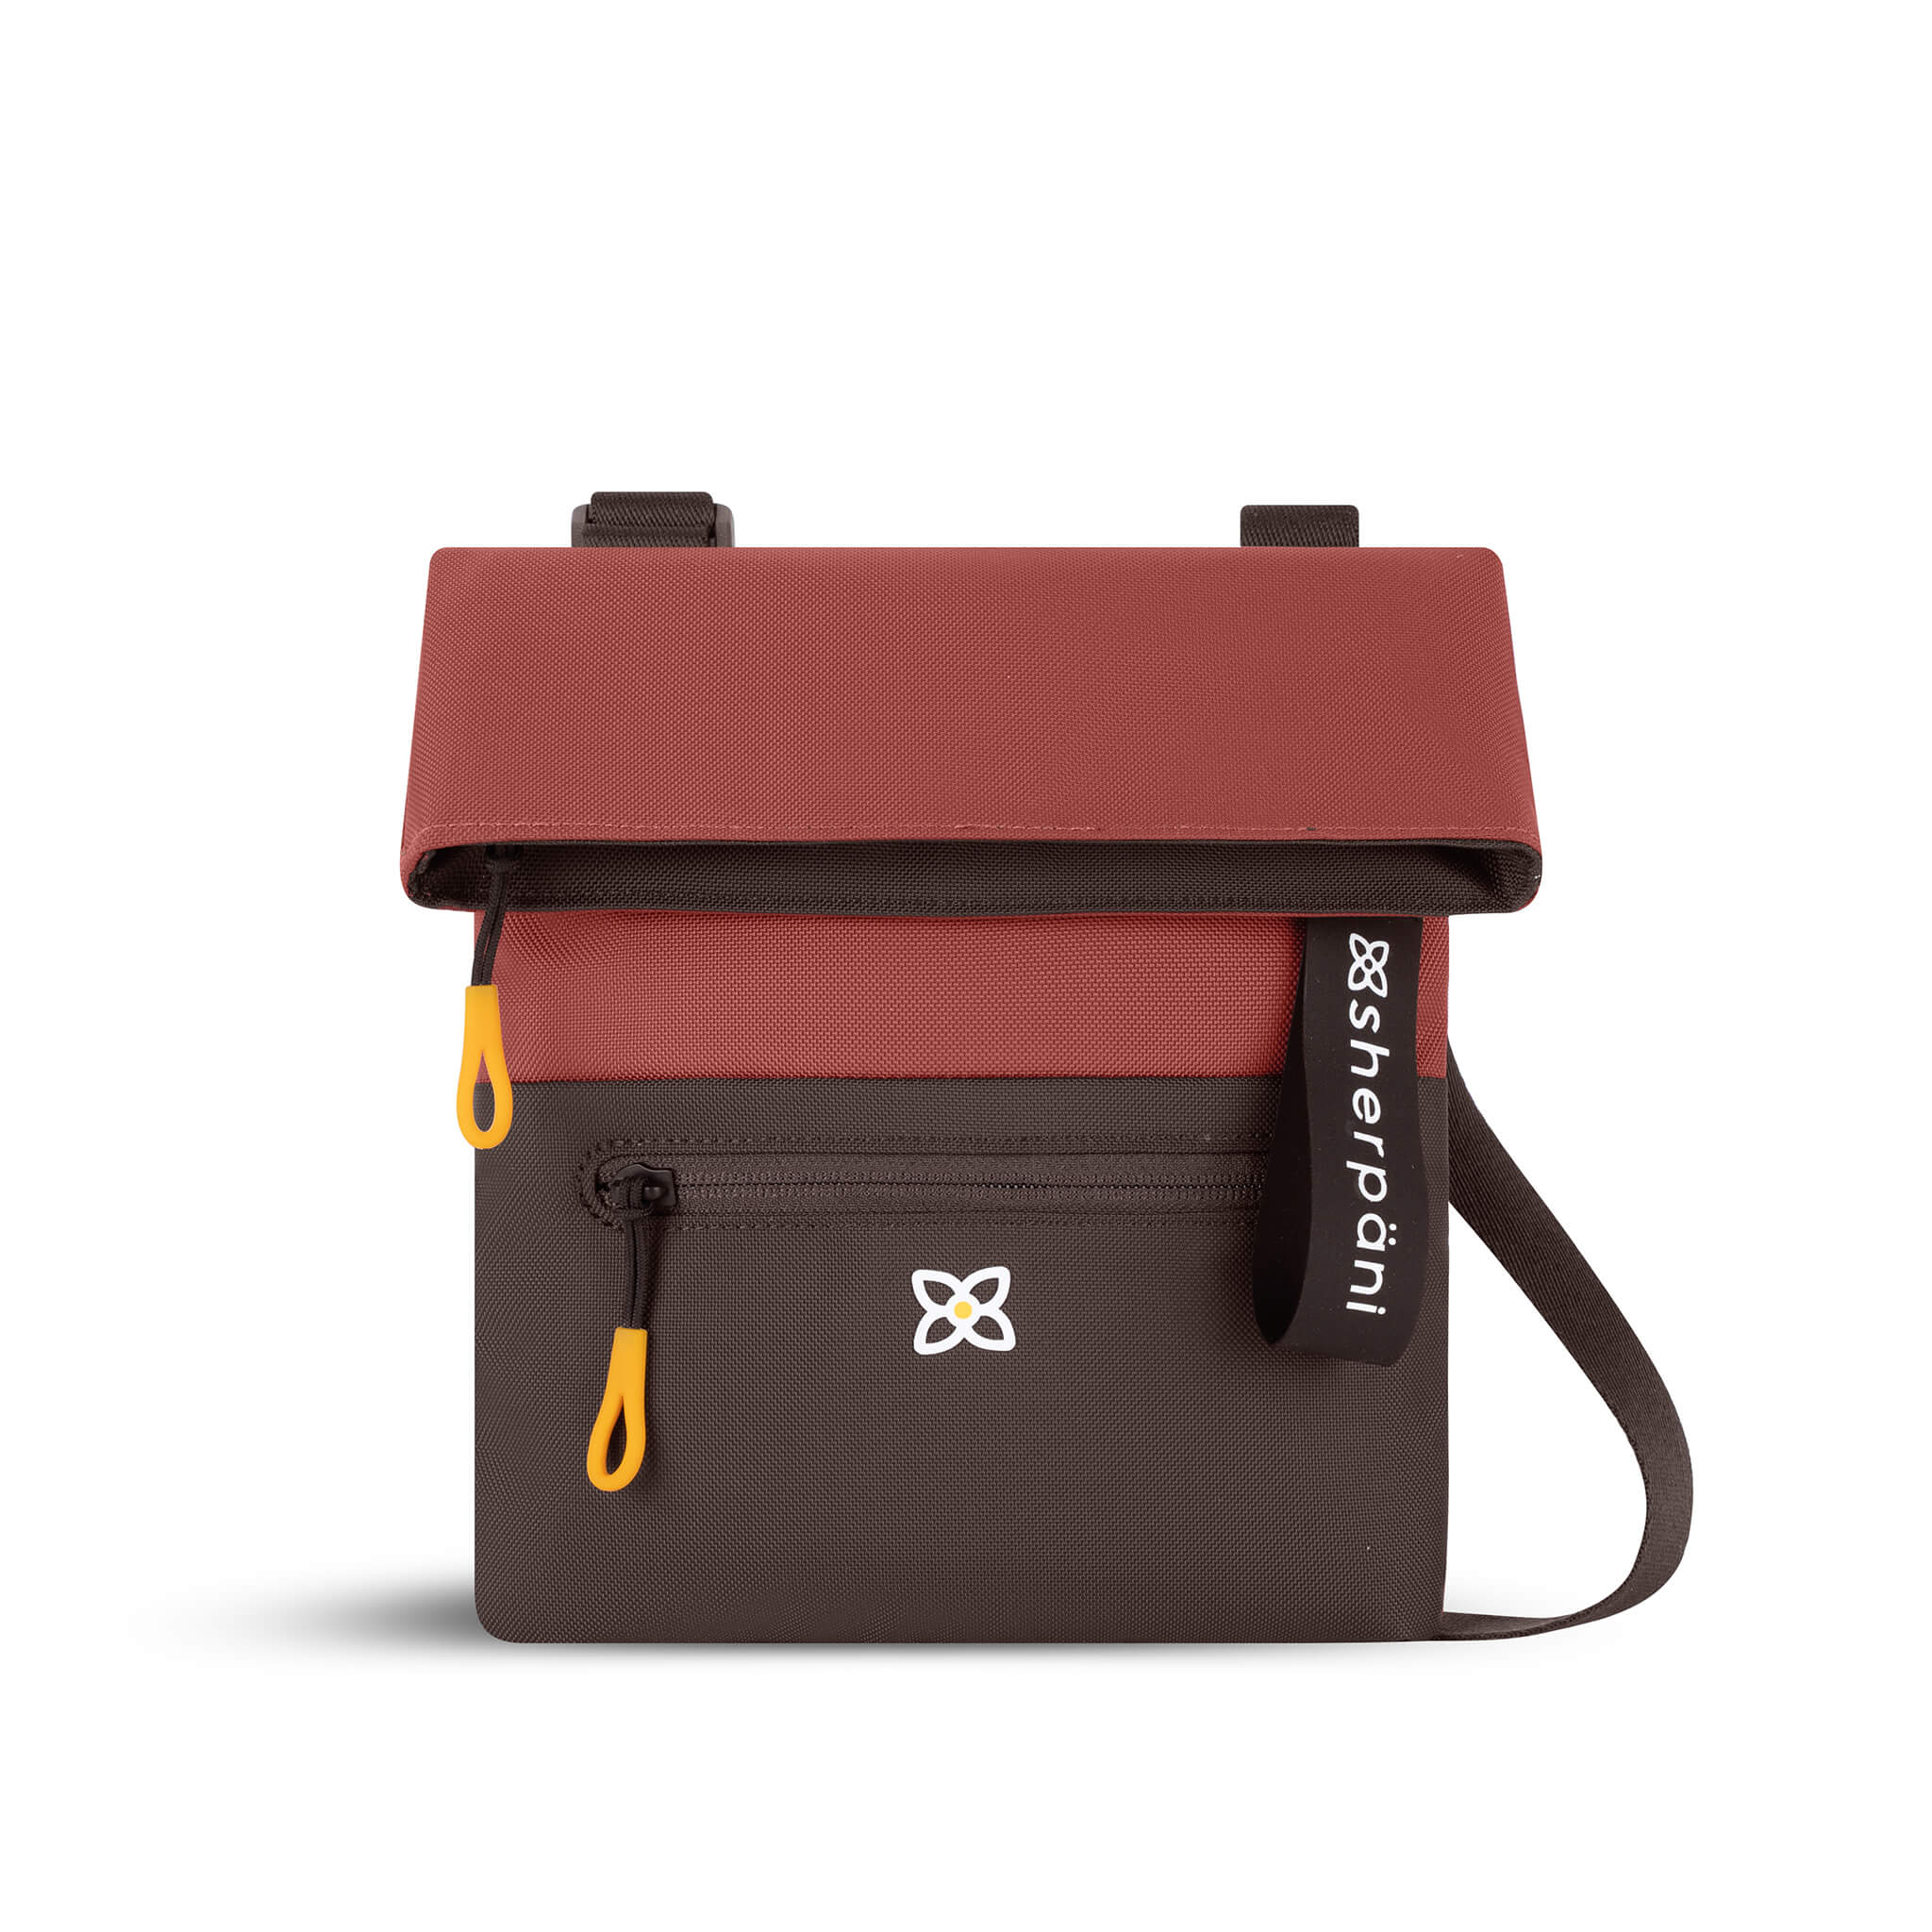 Flat front view of Sherpani fold over crossbody bag, the Pica in Cider. Pica features include an adjustable crossbody strap, outside zipper pocket, back flap pocket, inside zipper pocket and slip pocket, detachable keychain and RFID protection. The Cider color is two-toned in burgundy and dark brown with Sherpani logo (edelweiss flower) accented in white. 